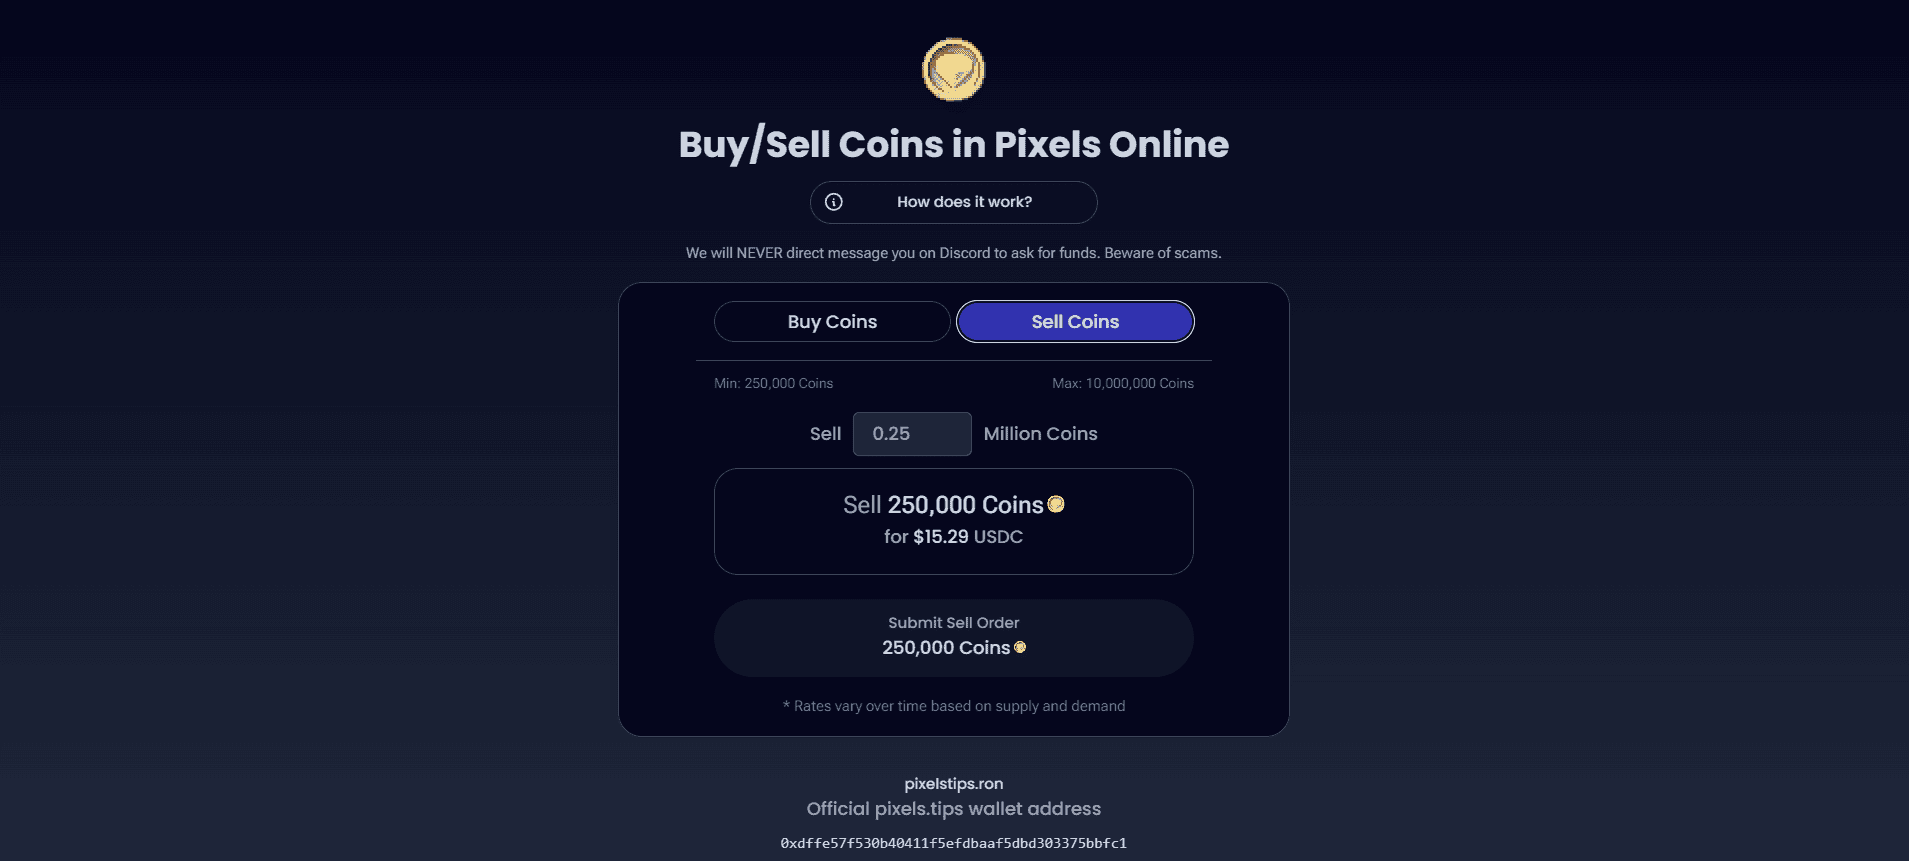 Guide to Selling/Buying Gold Coins in Pixels: A Step-by-Step Process